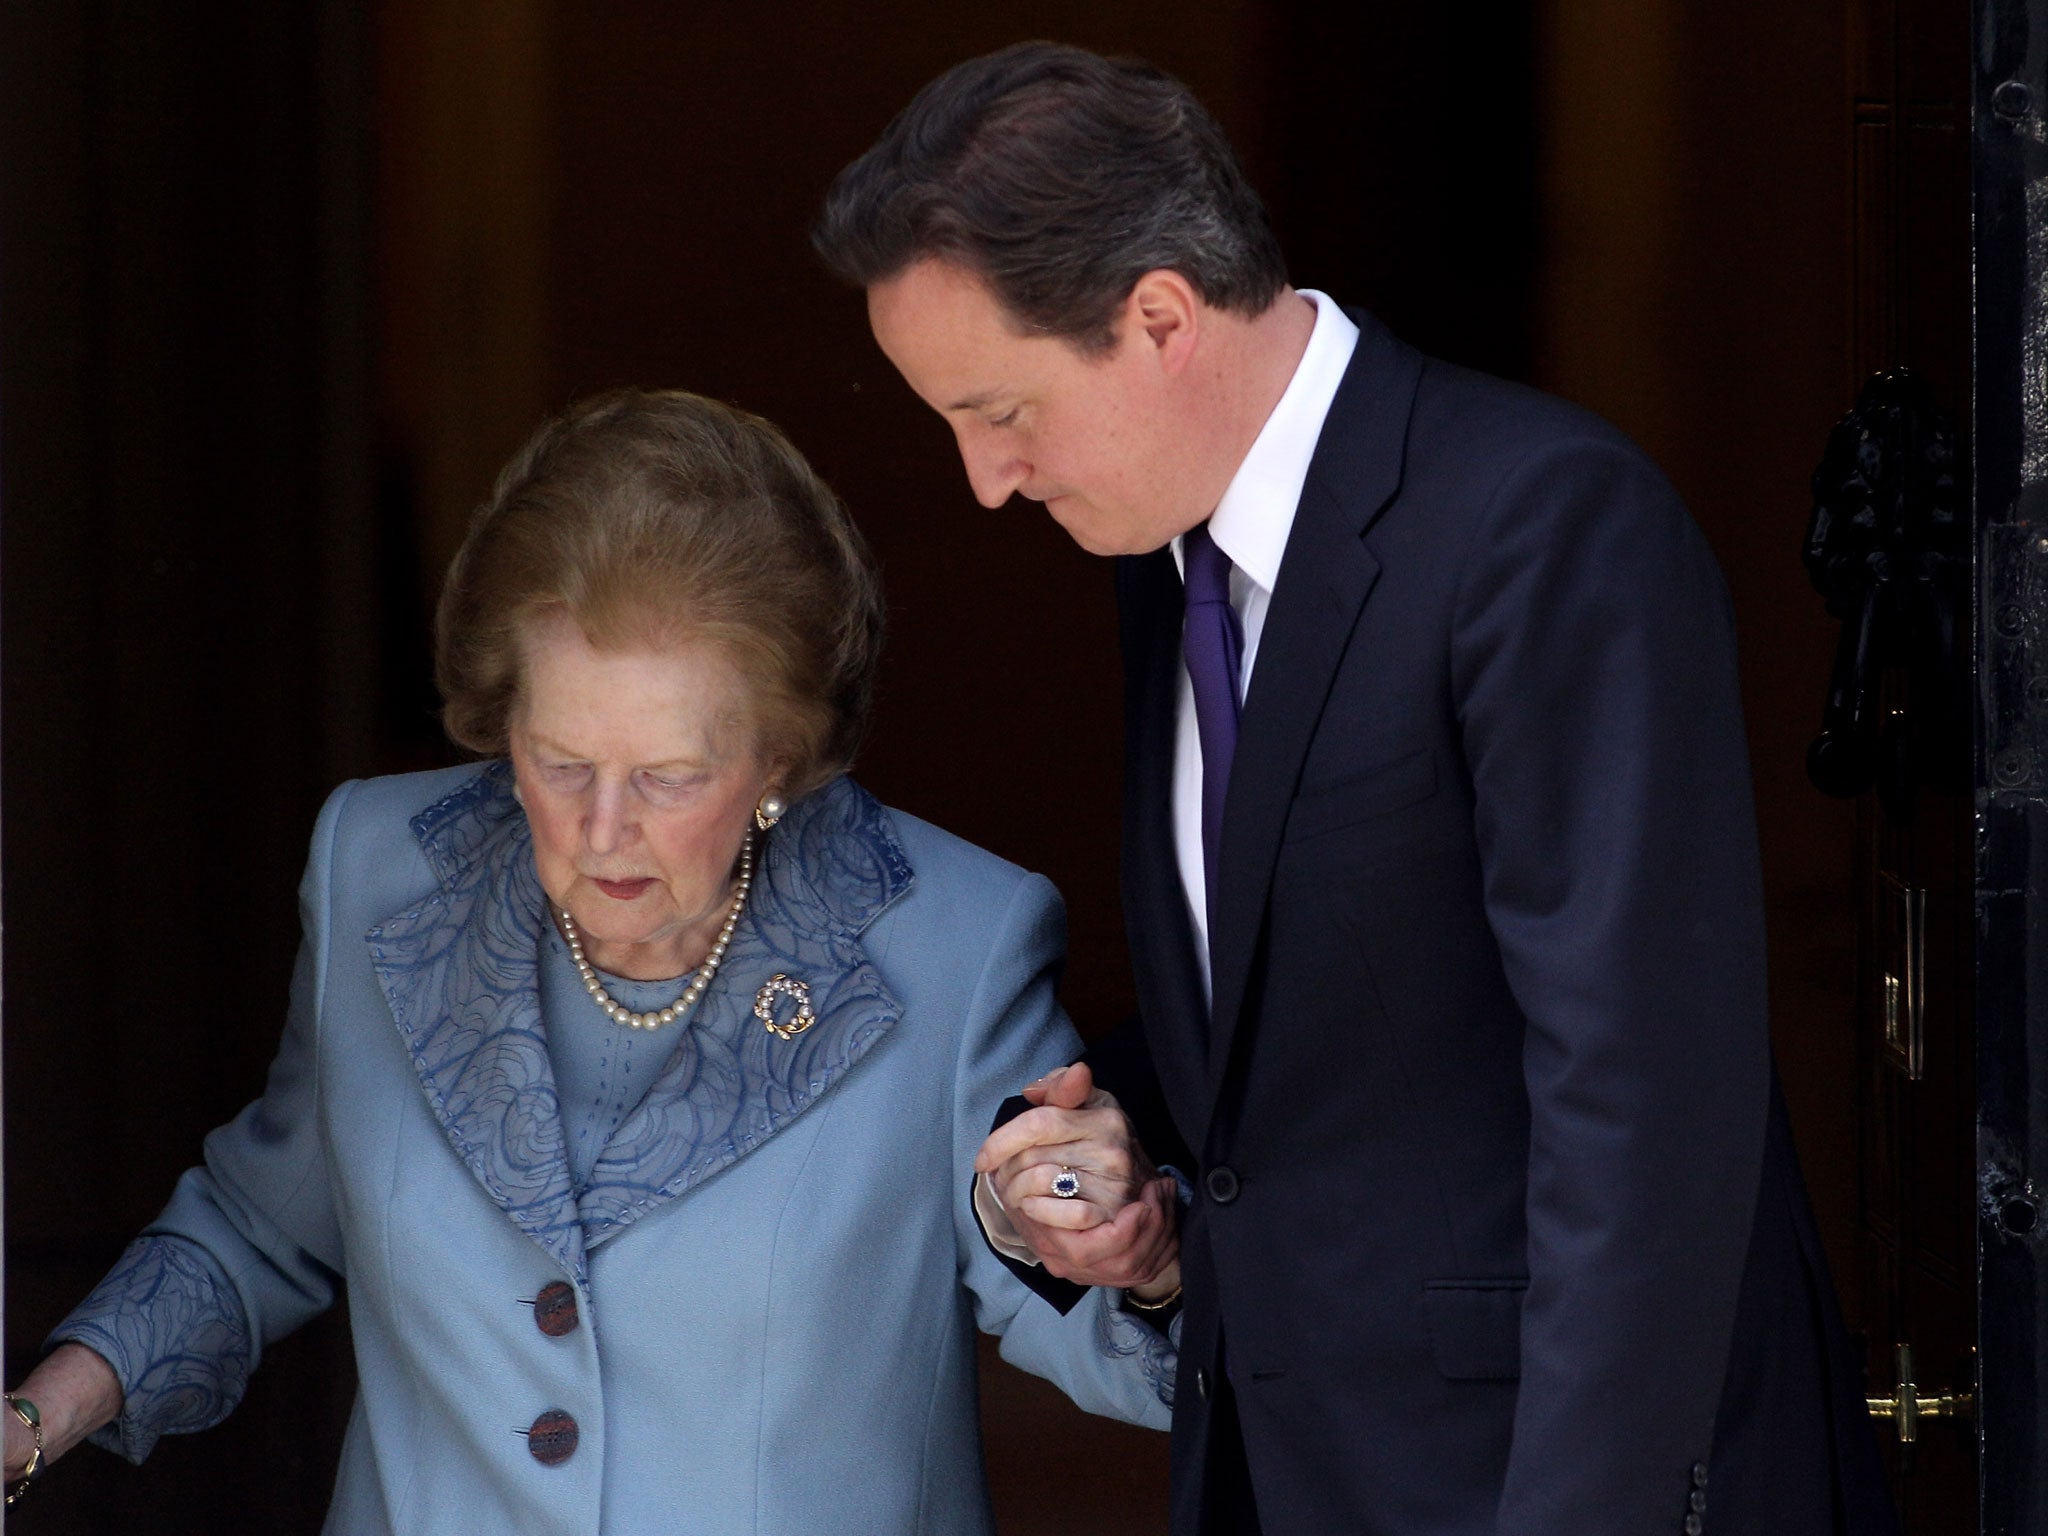 British Prime Minister David Cameron and former Prime Minister Baroness Thatcher leave from Number 10 Downing Street following her visit on June 8, 2010 in London, England.